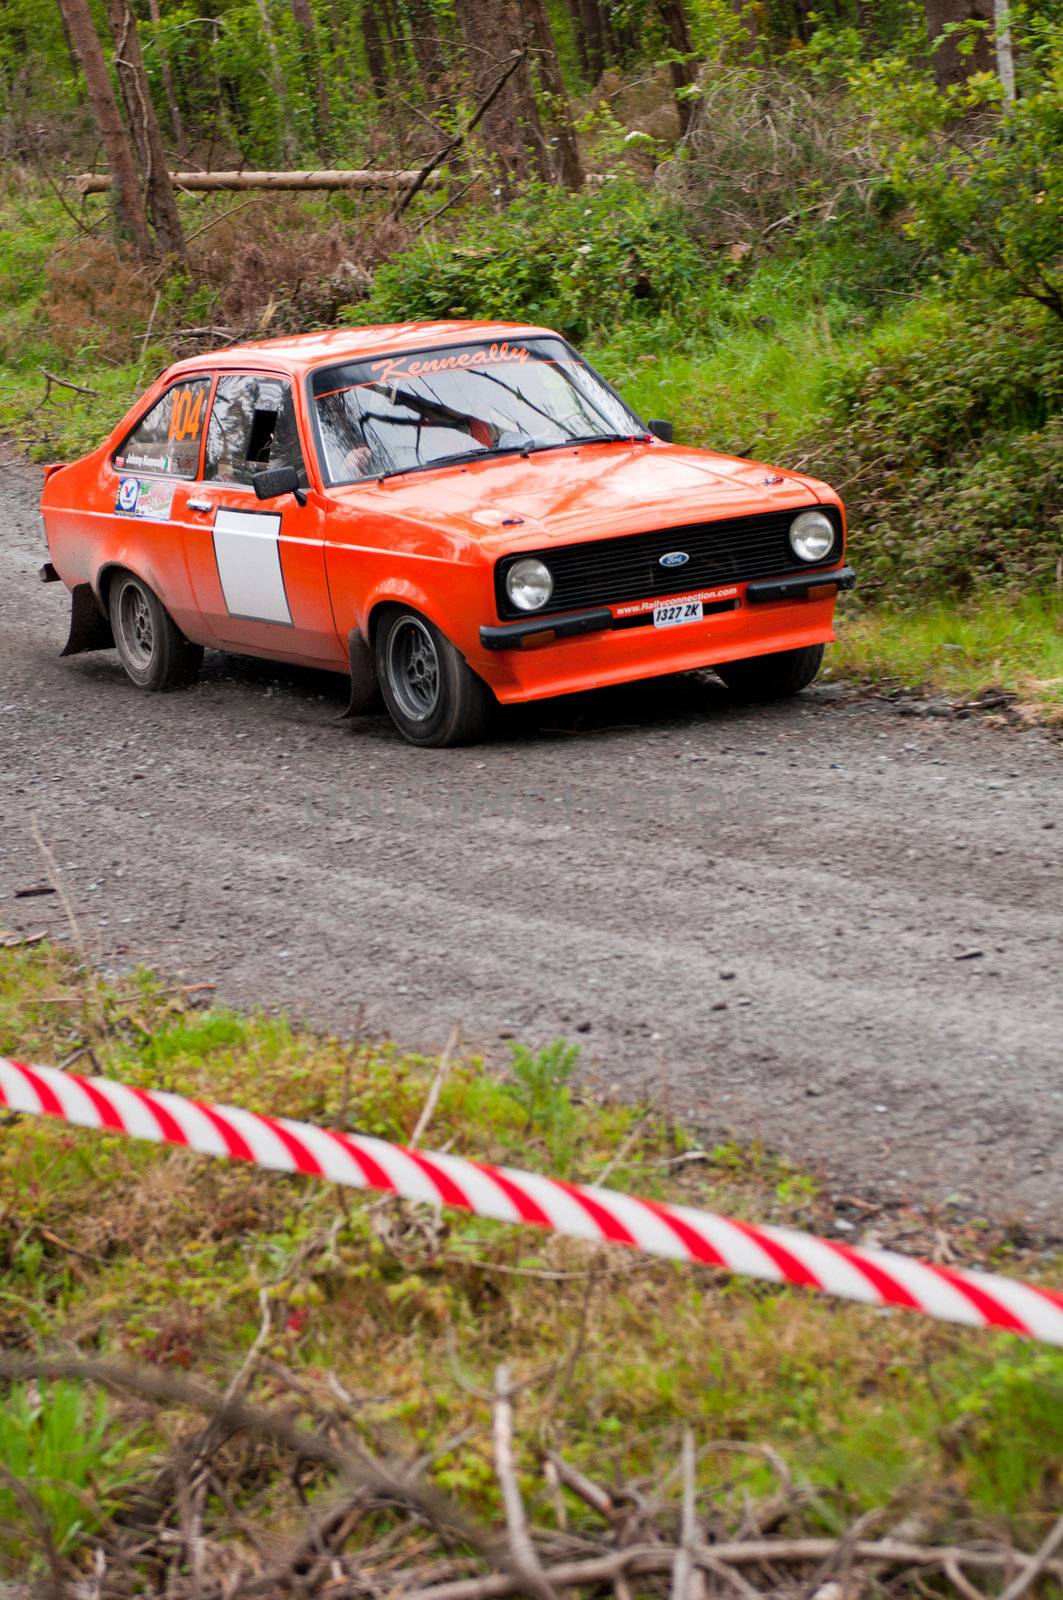 J. Kenneally driving Ford Escort by luissantos84